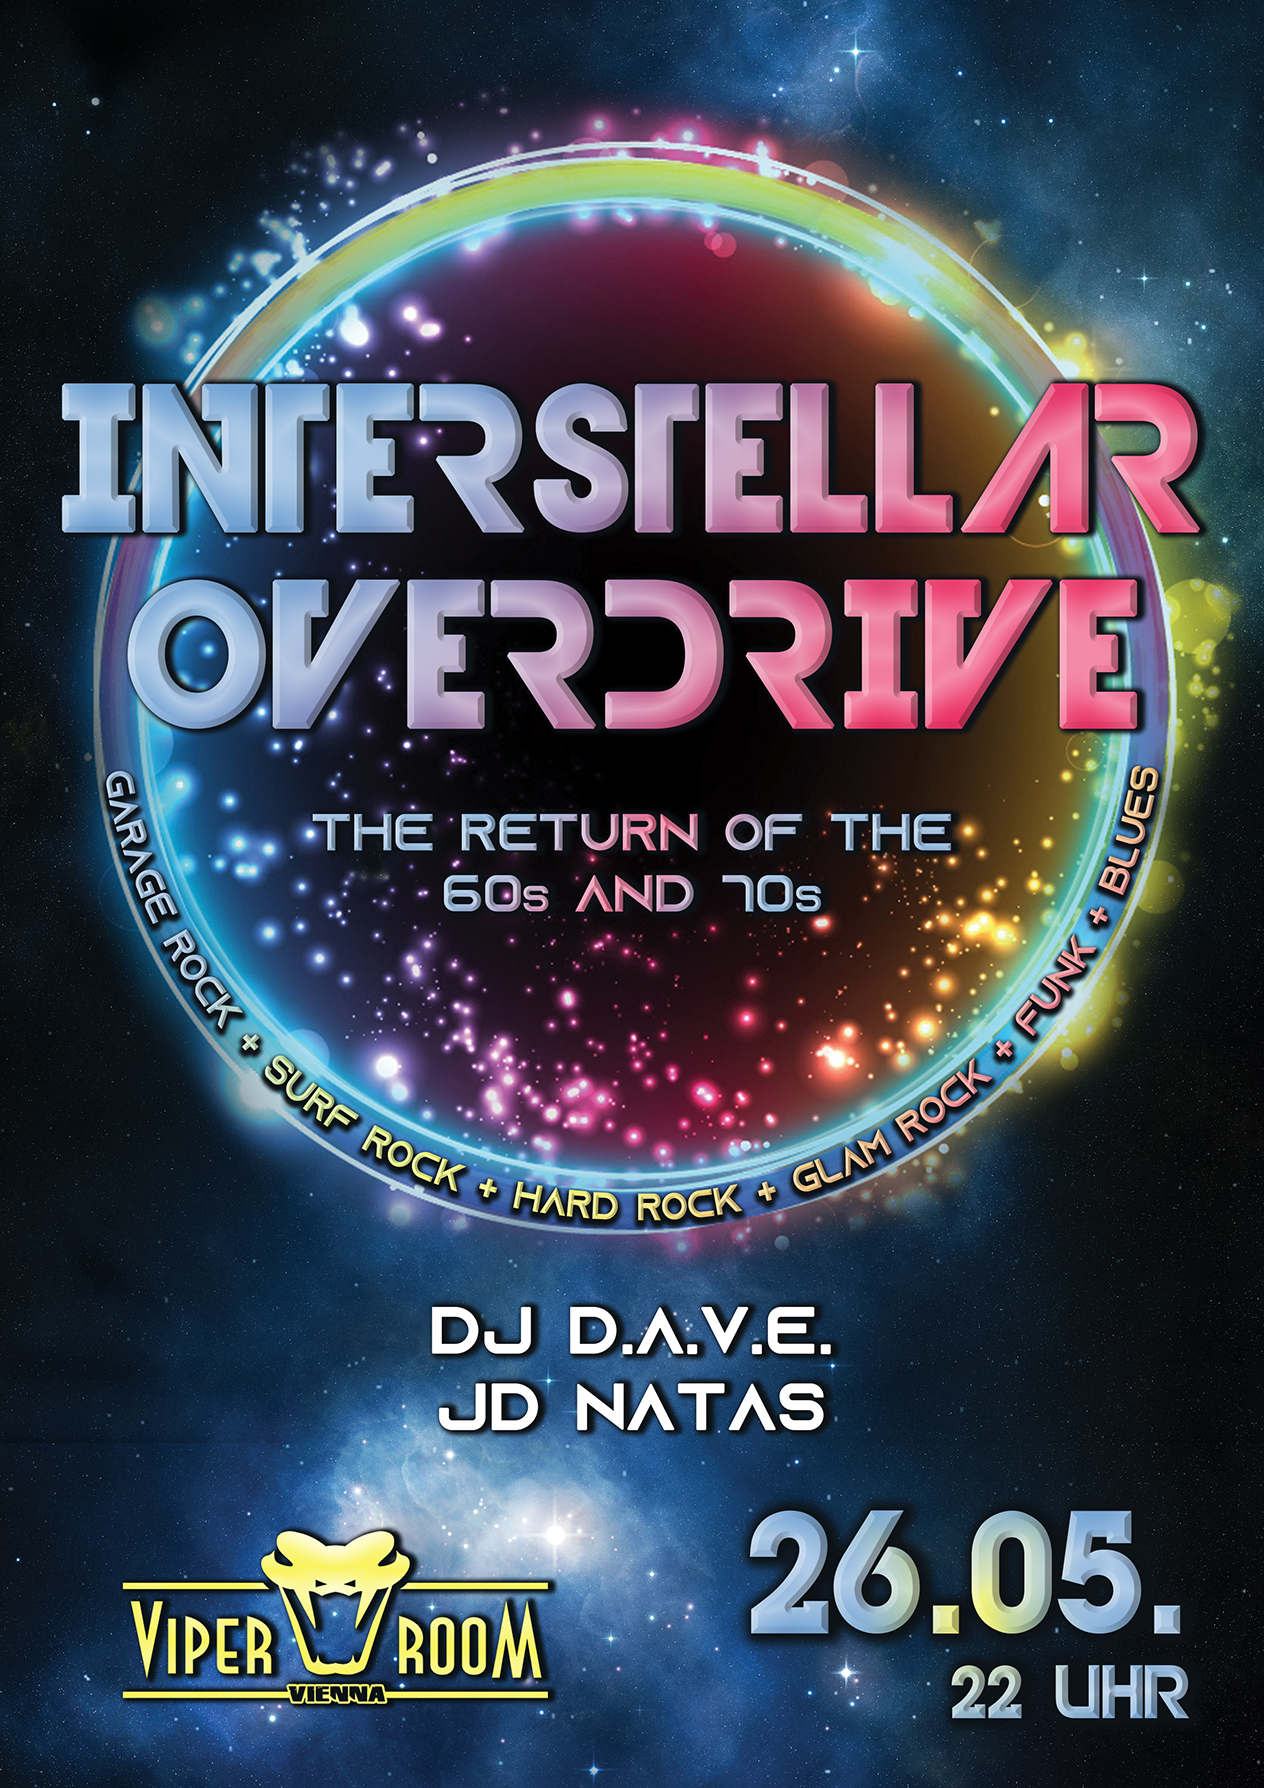 INTERSTELLAR OVERDRIVE - The Return Of The 60s & 70s am 26. May 2023 @ Viper Room.